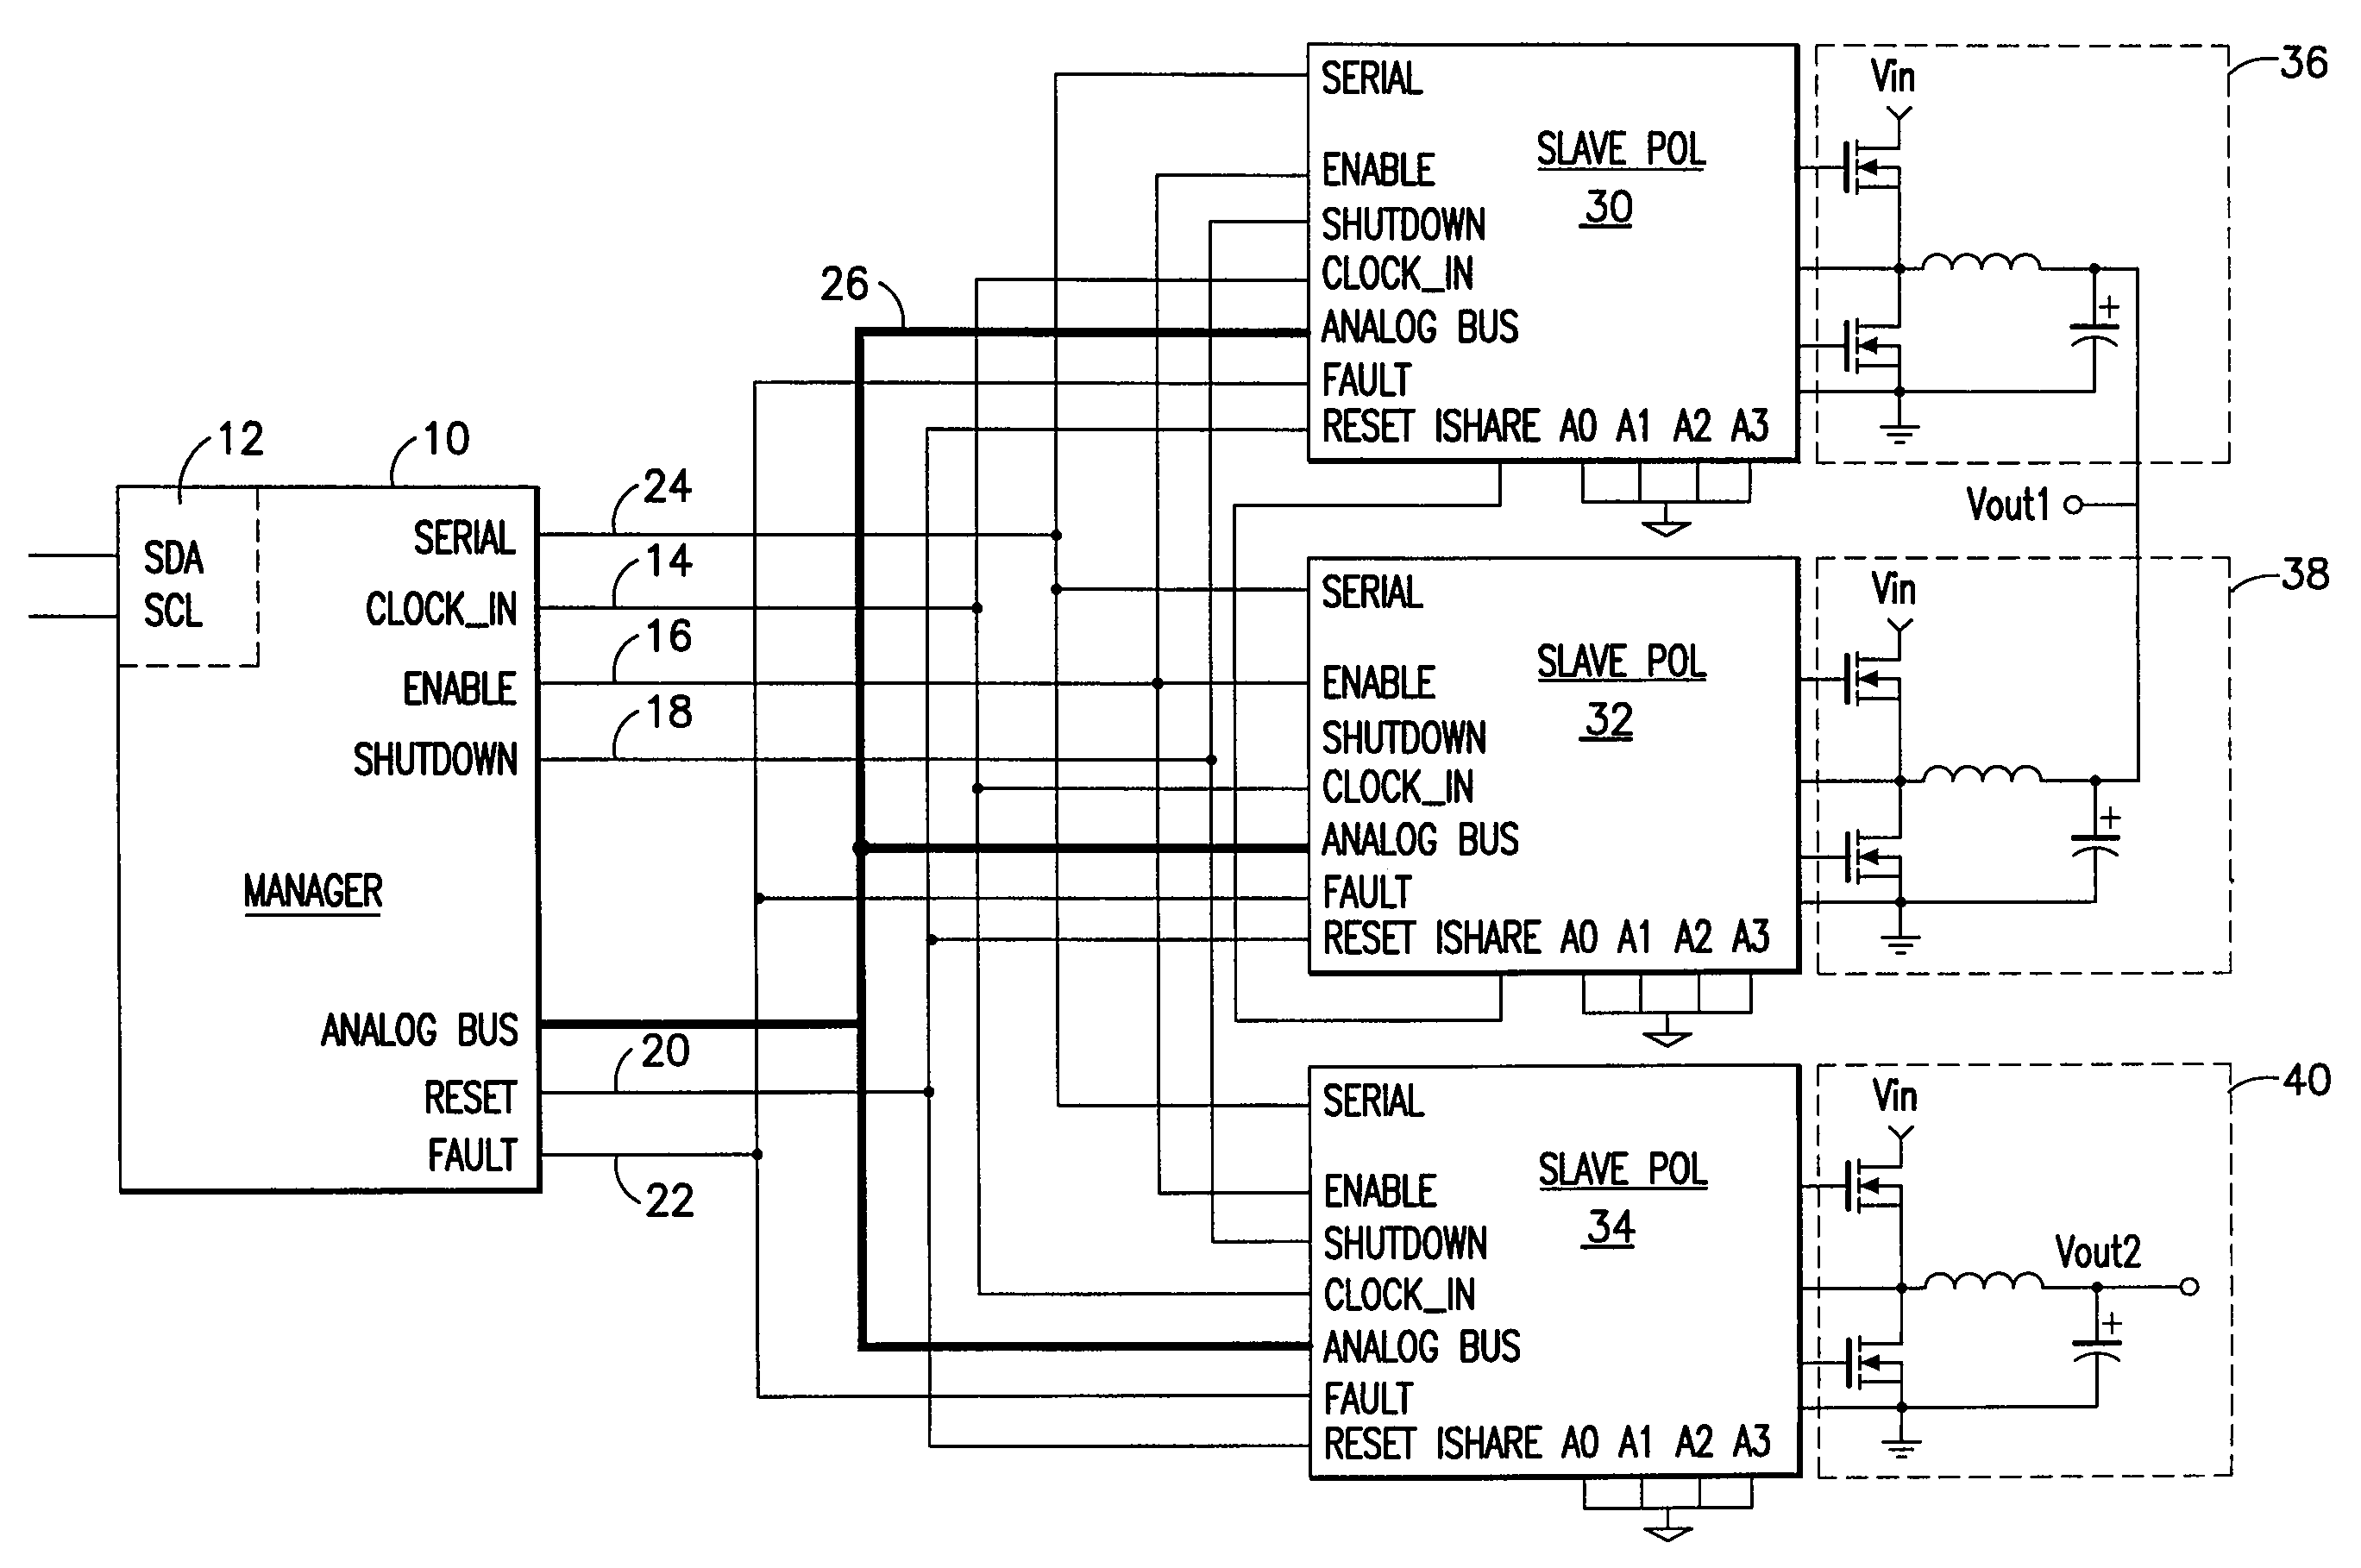 POL system architecture with analog bus